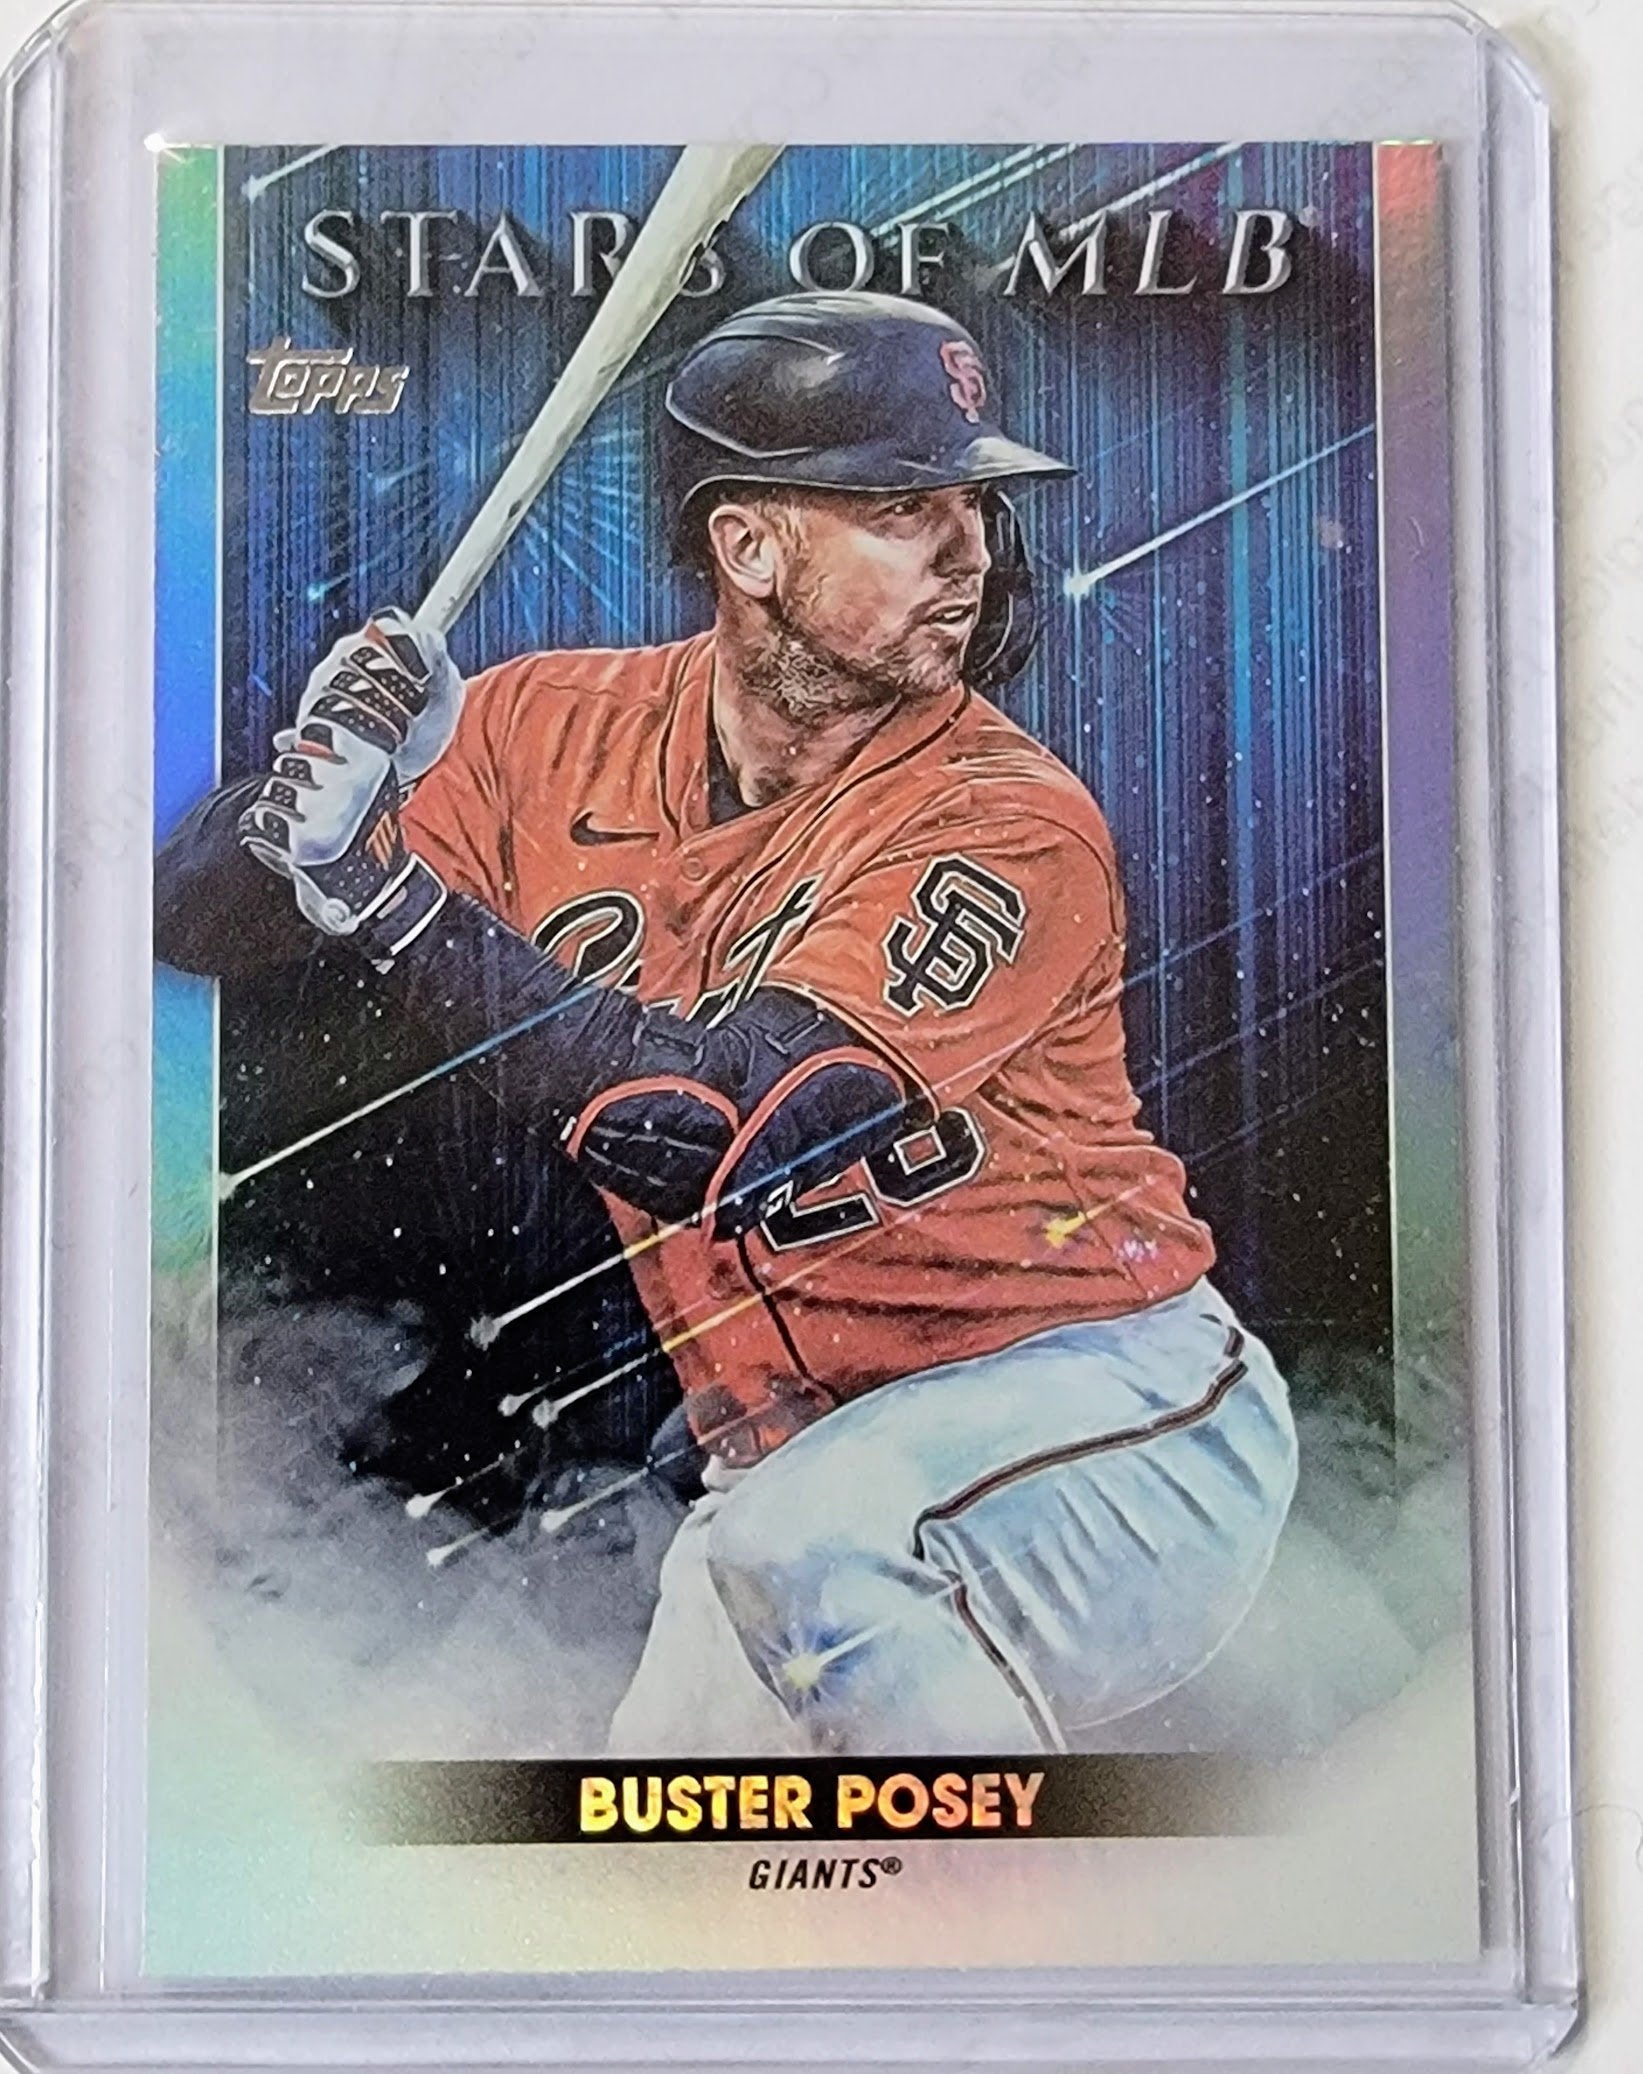 2022 Topps Buster Posey Stars of the MLB Baseball Trading Card GRB1_1a simple Xclusive Collectibles   